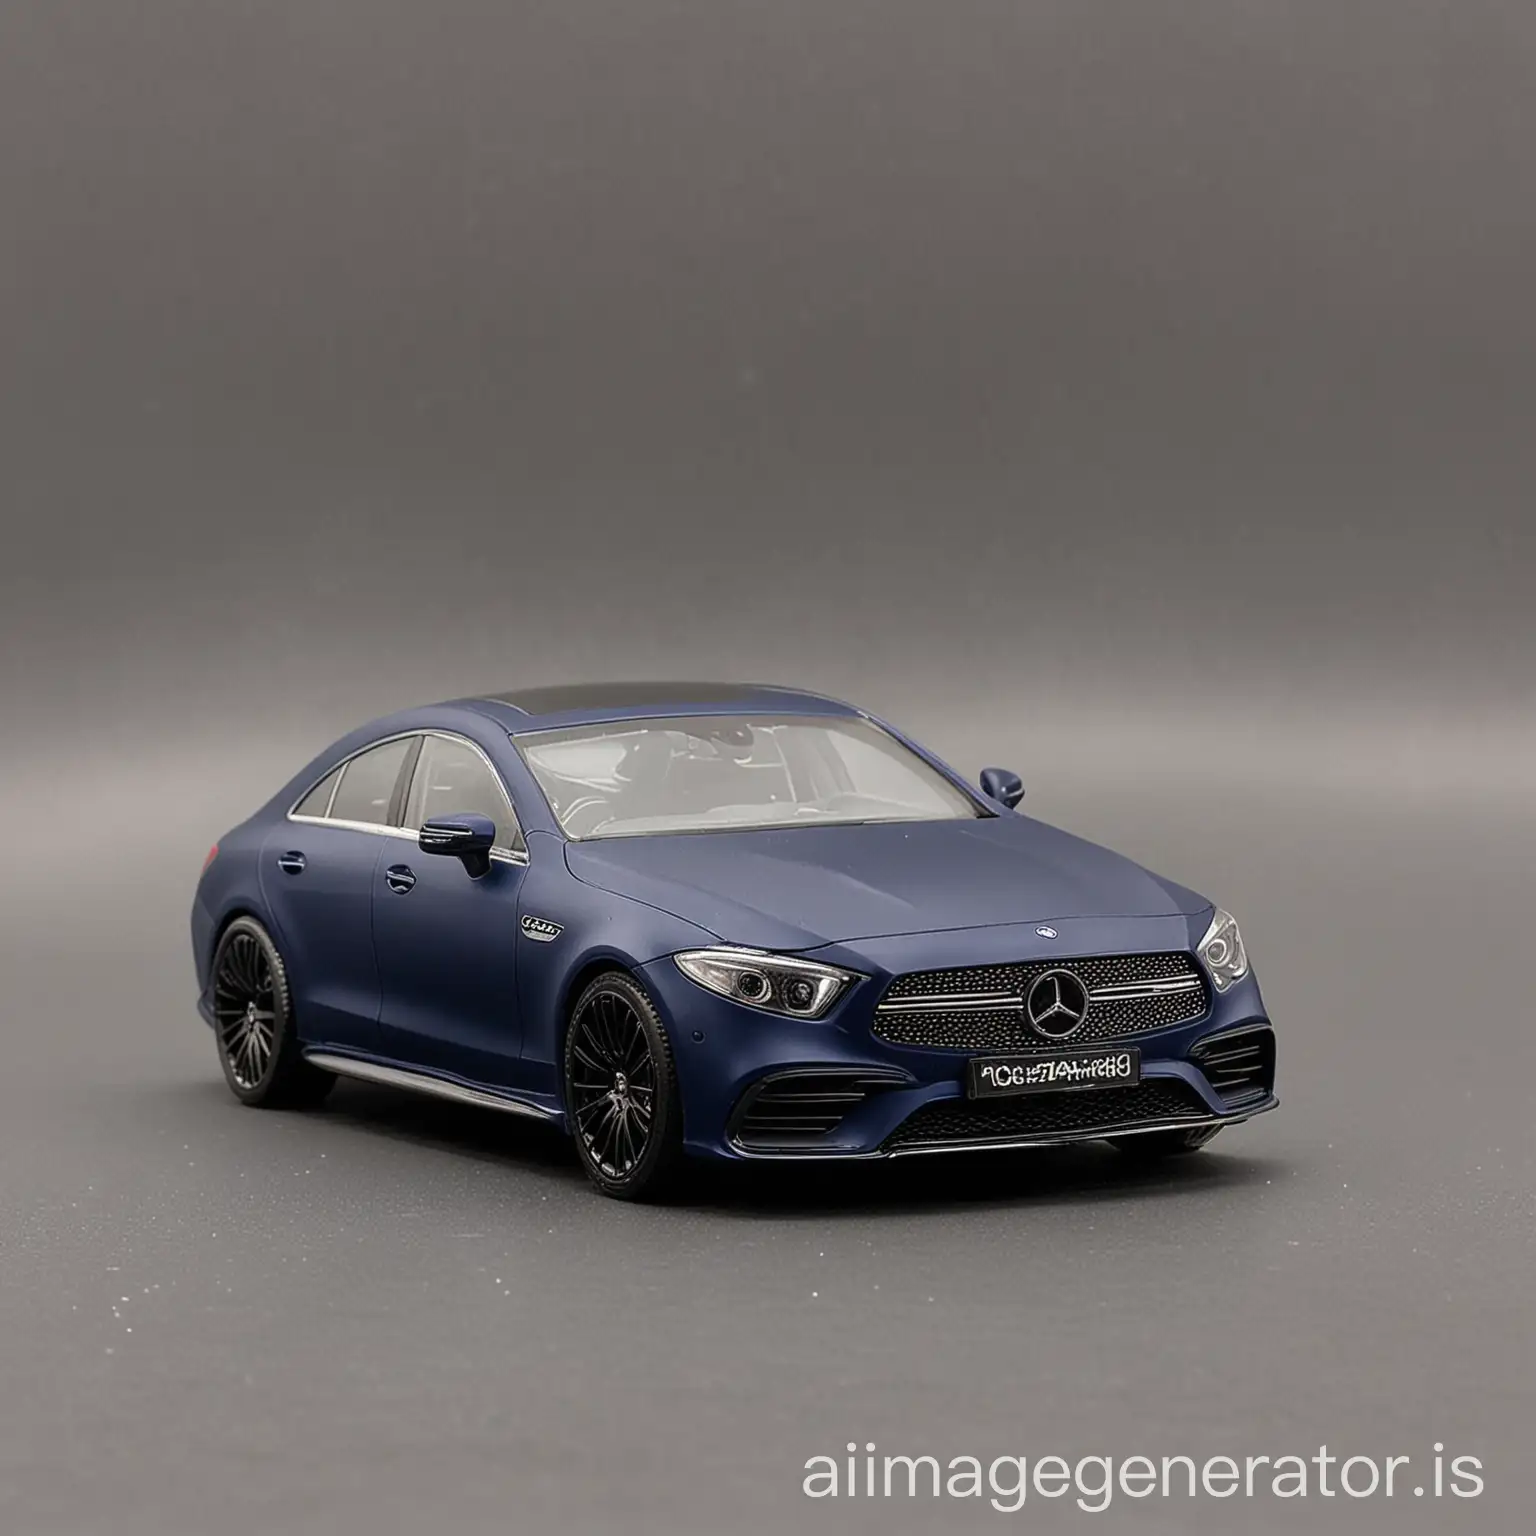 Mercedes CLS 450 AMG C257 model in matte mid-night blue colour